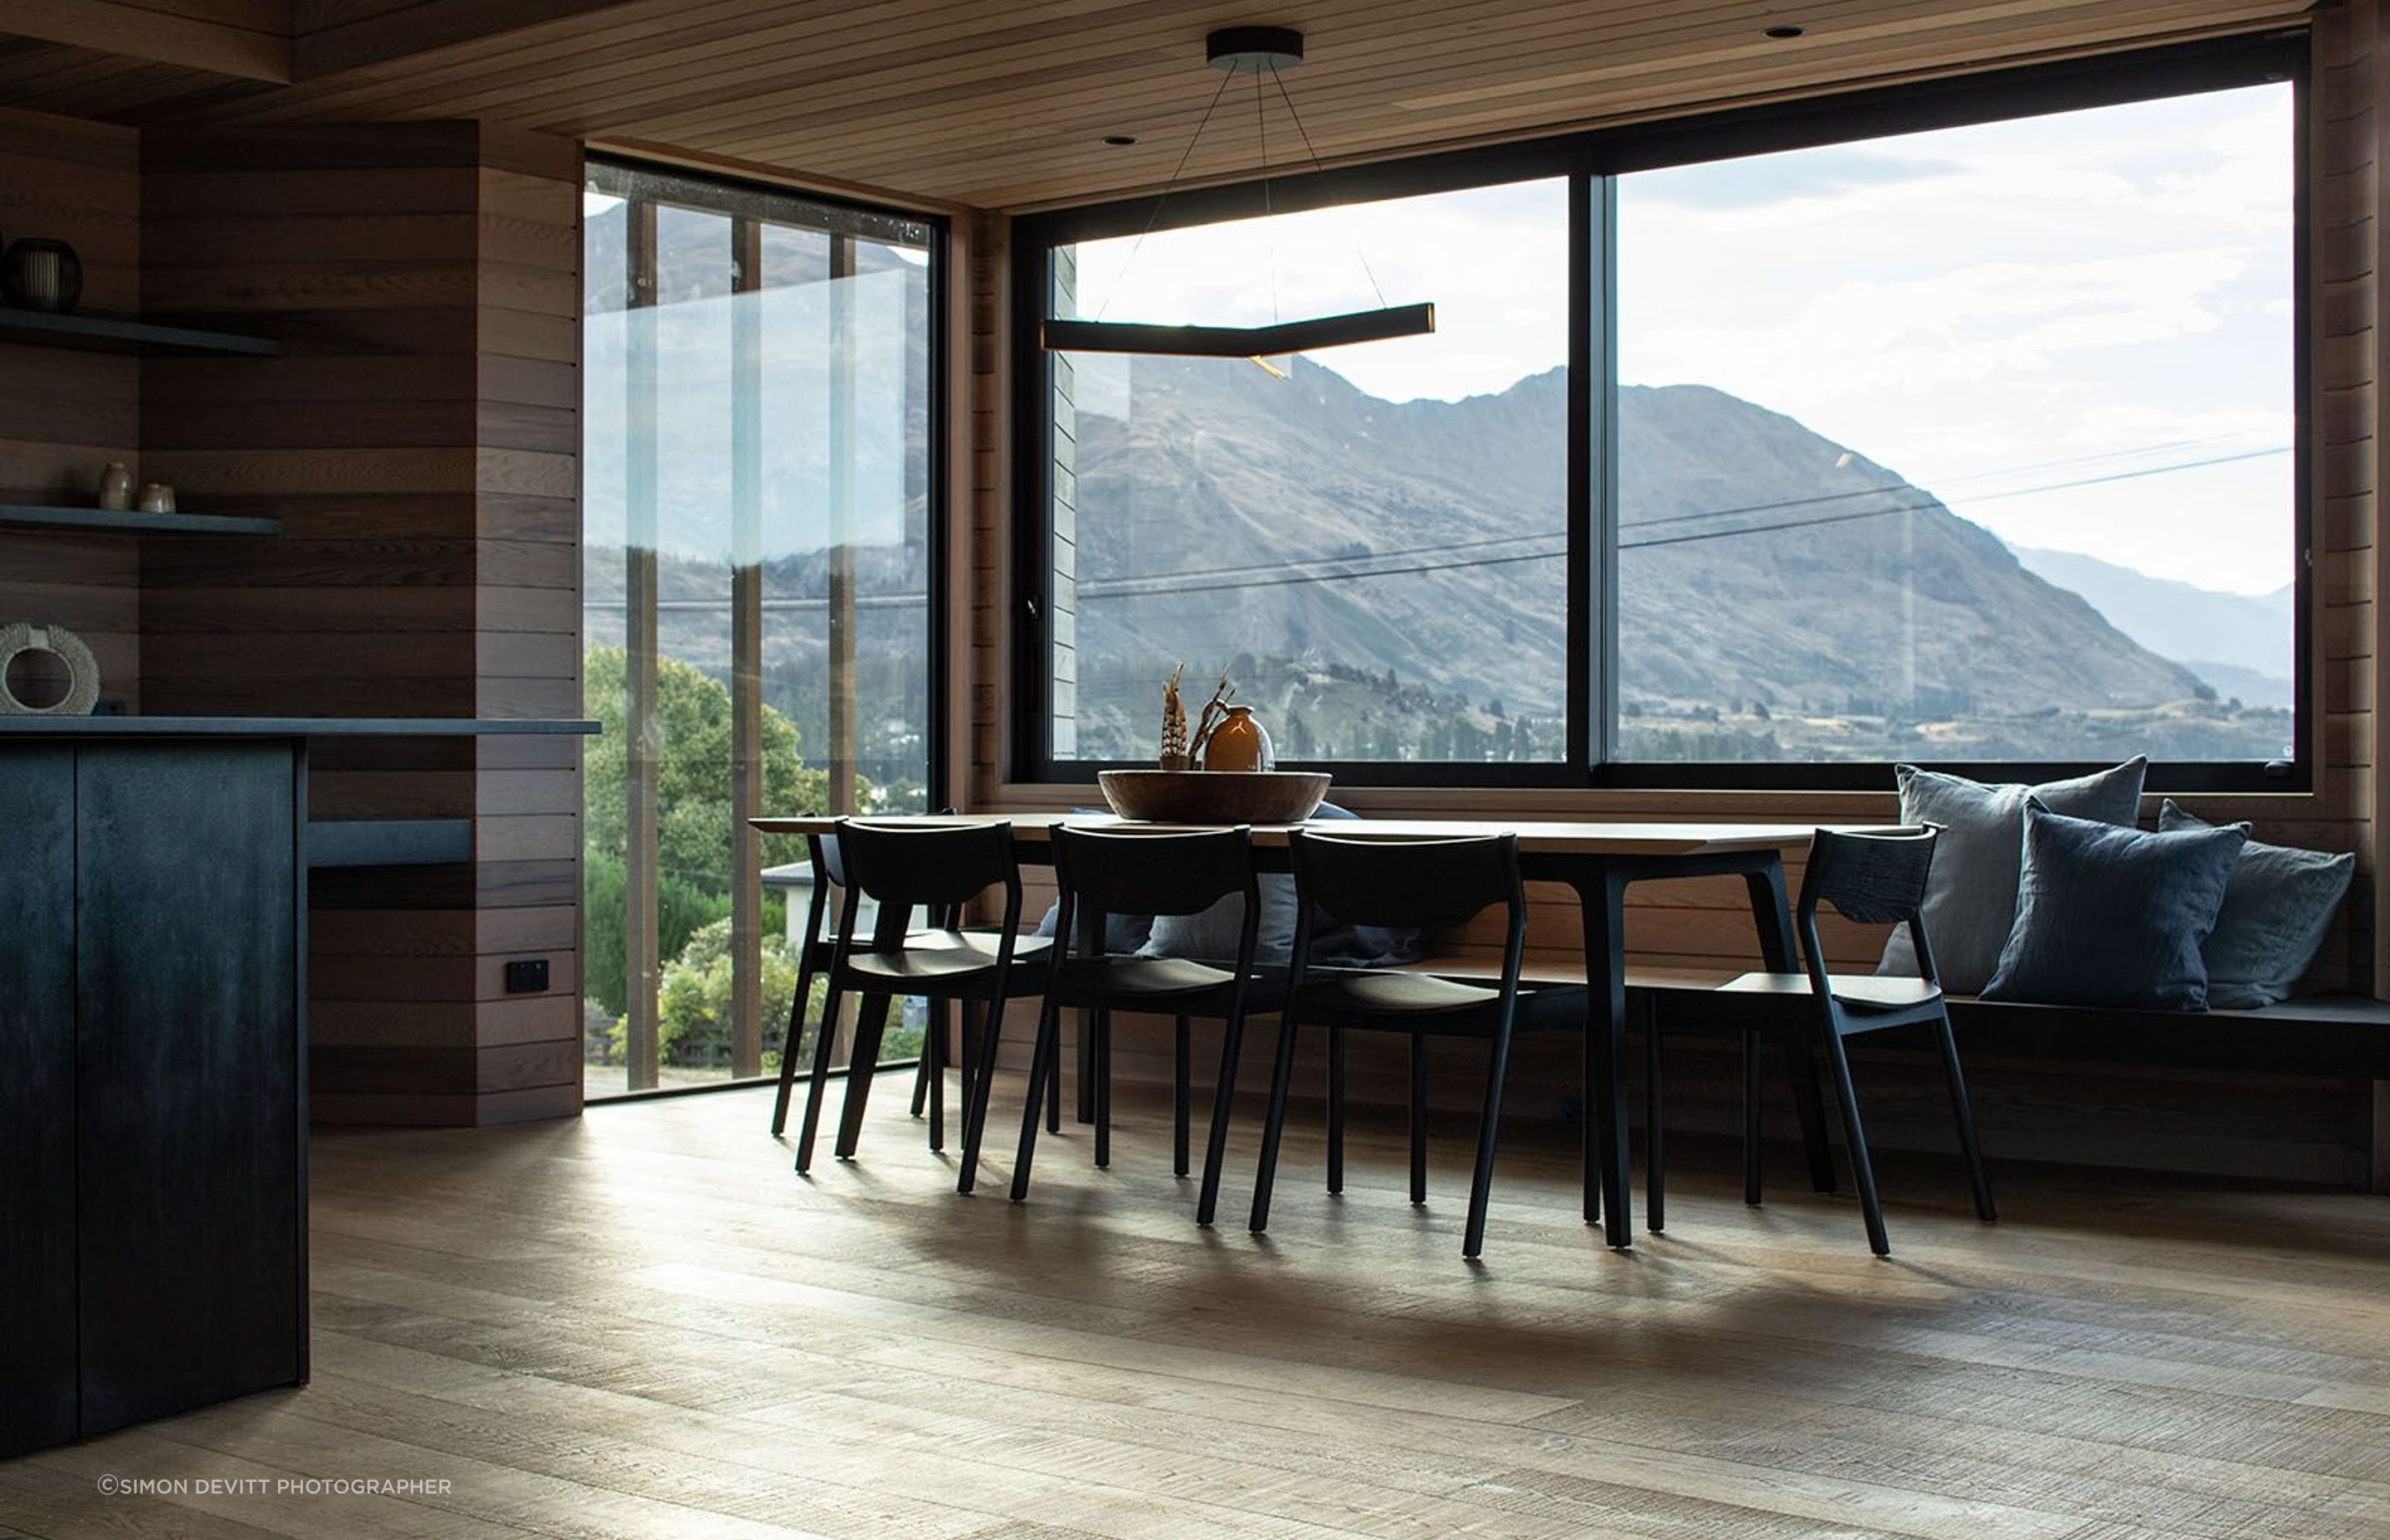 The dining area enjoys dynamic views over the lake and mountain ranges.